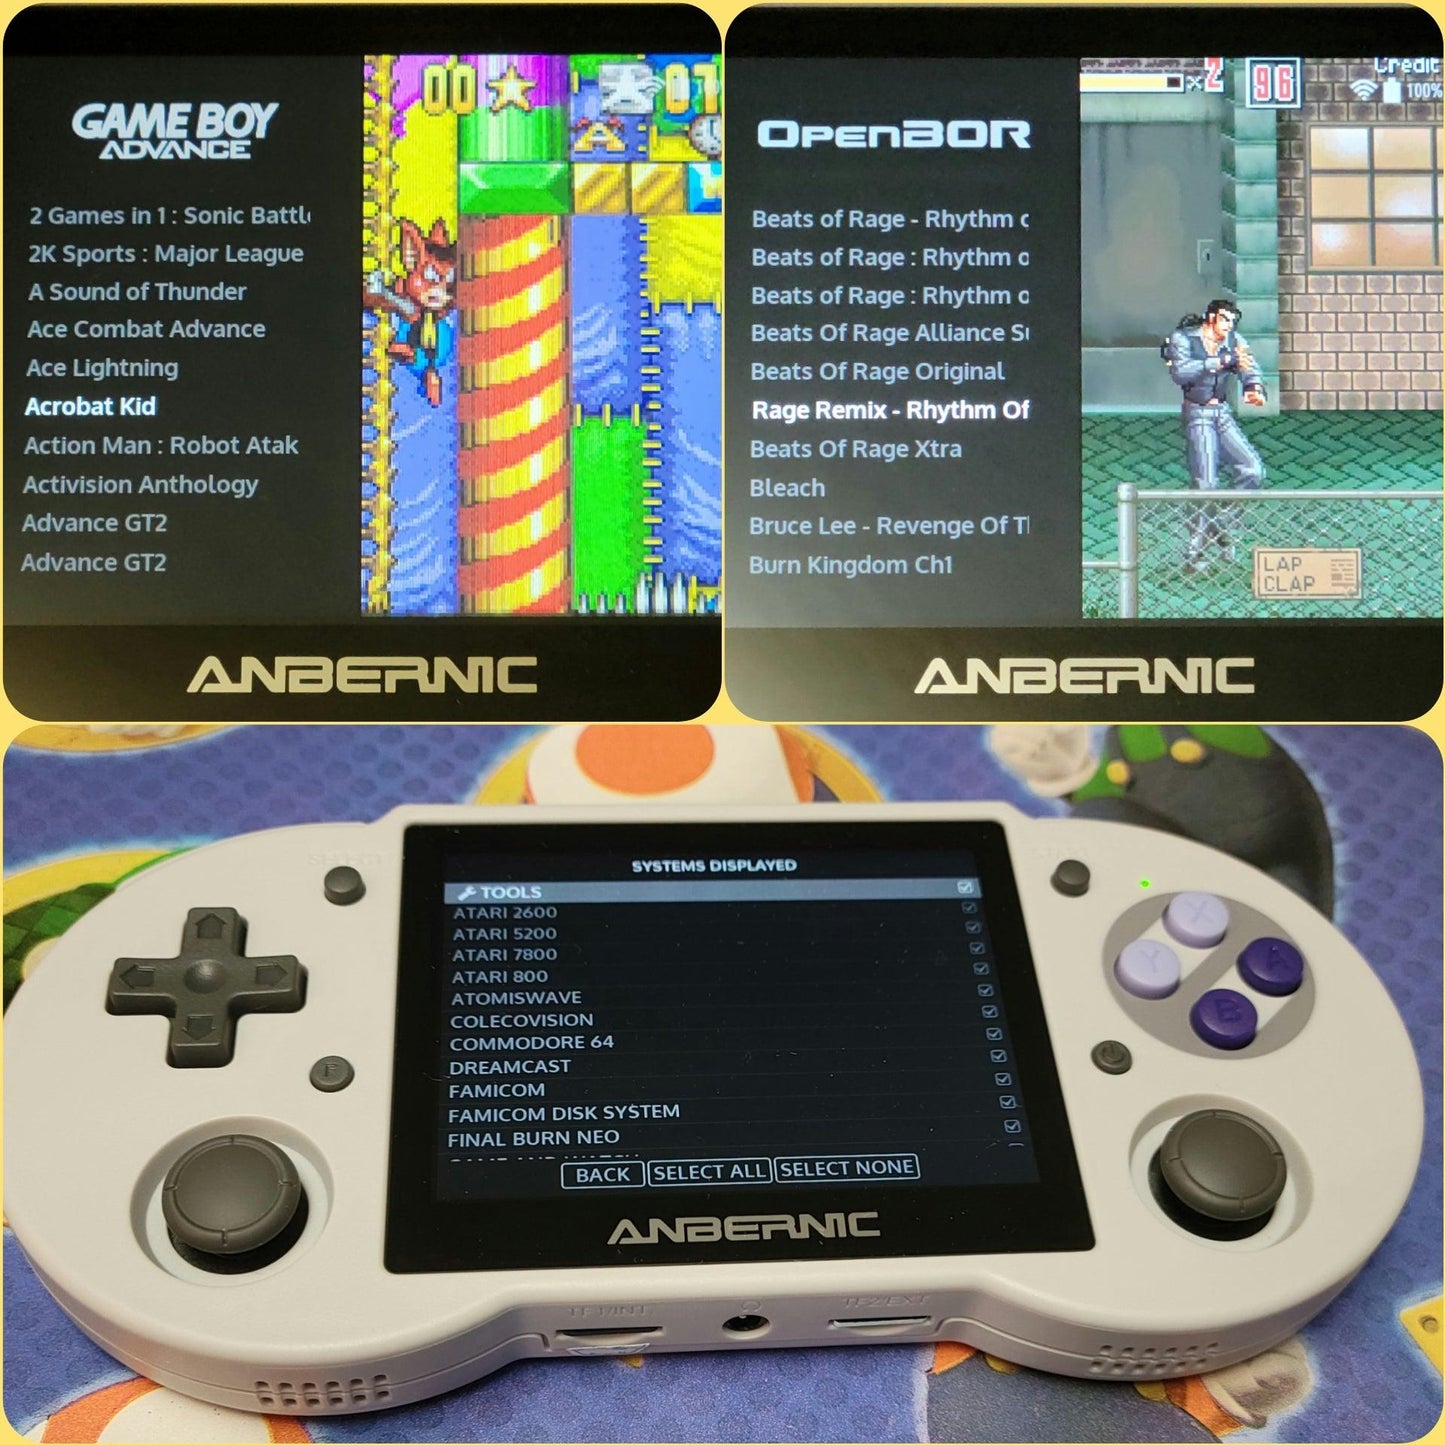 New Anbernic RG353P portable handheld game console, 256GB fully configured Linux OS - Arcadeclassics #